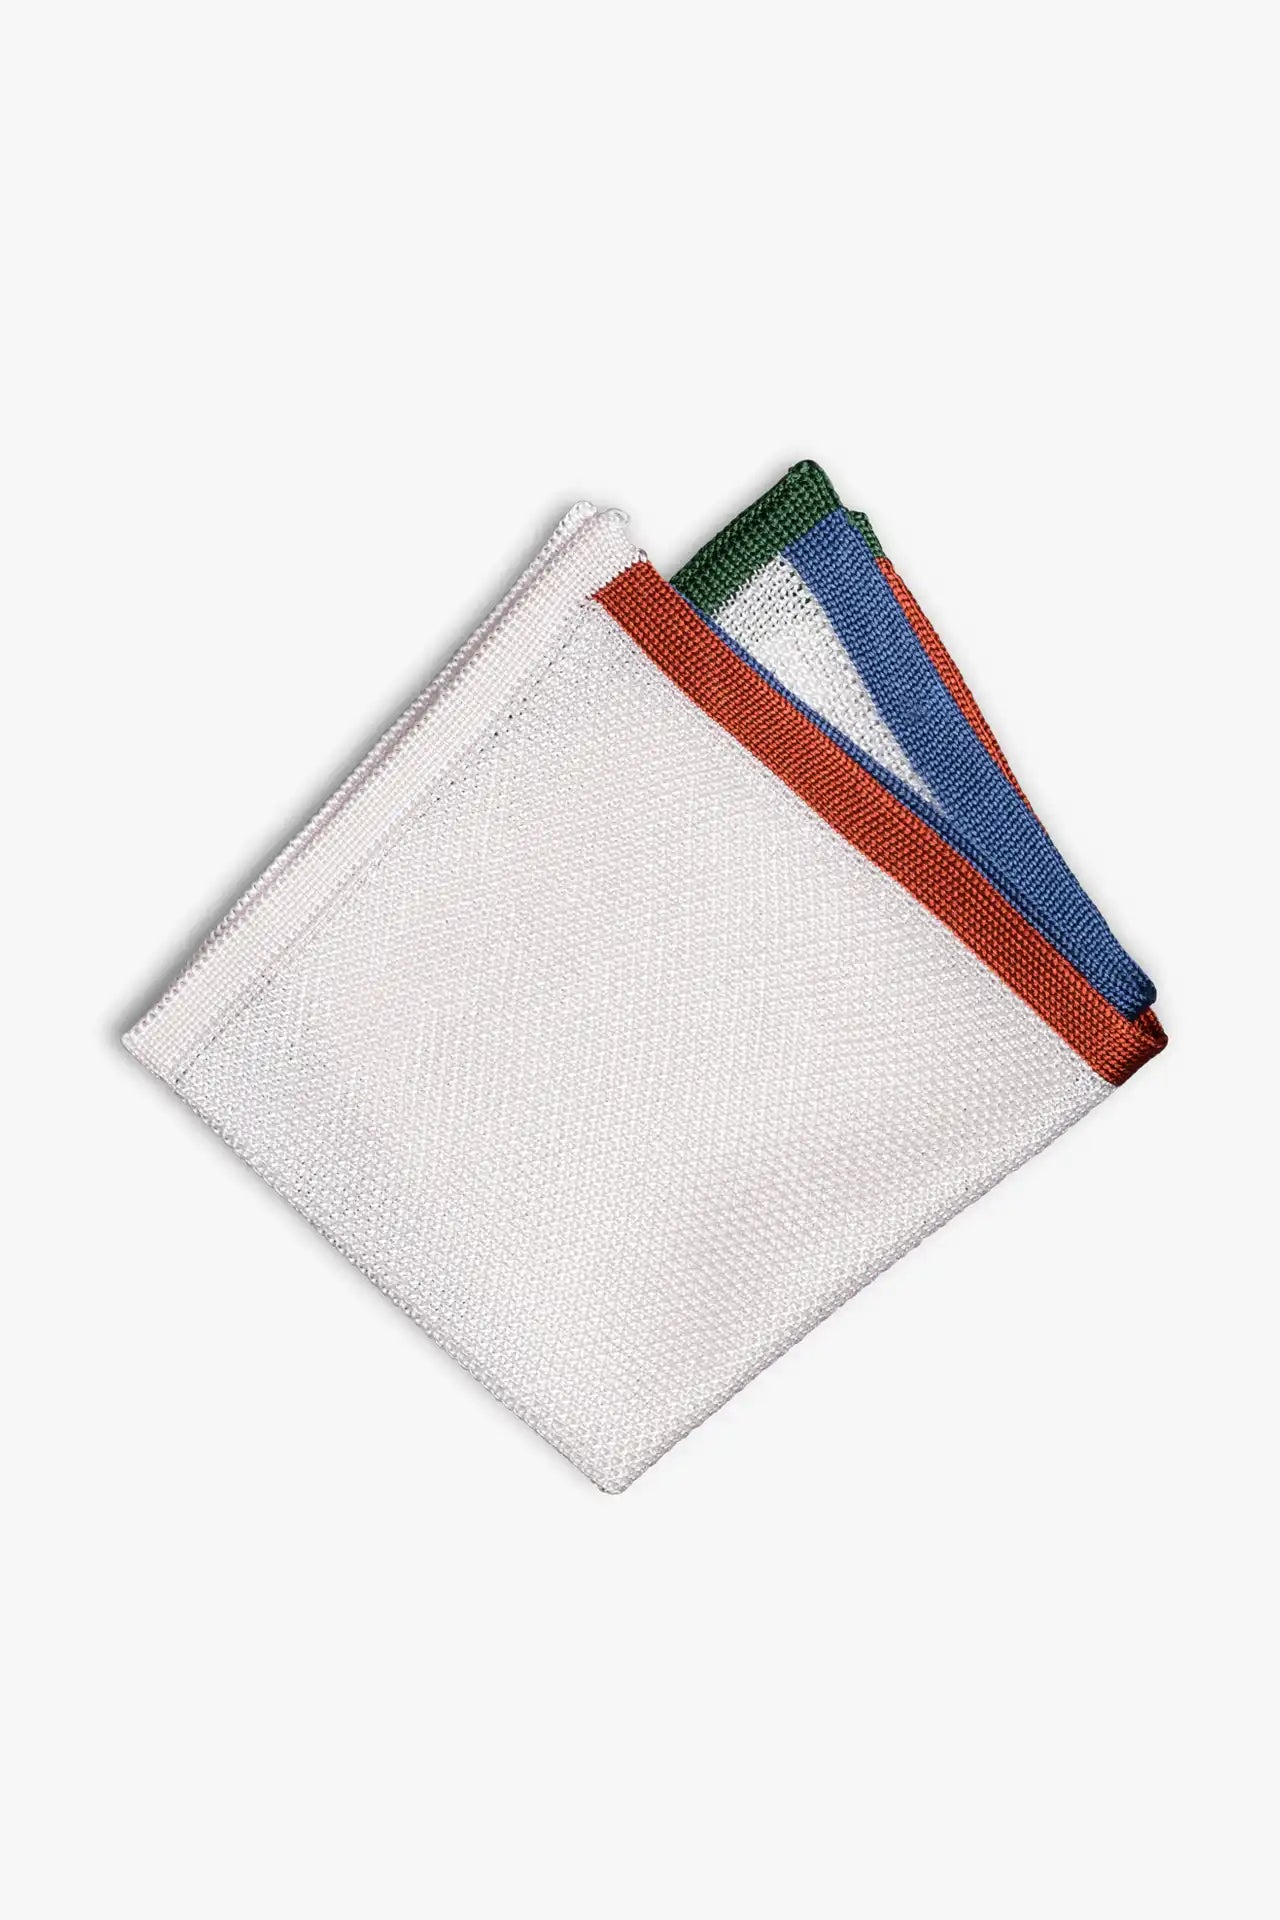 White pocket square with orange, blue and green boarder. Knitted silk made in Italy.